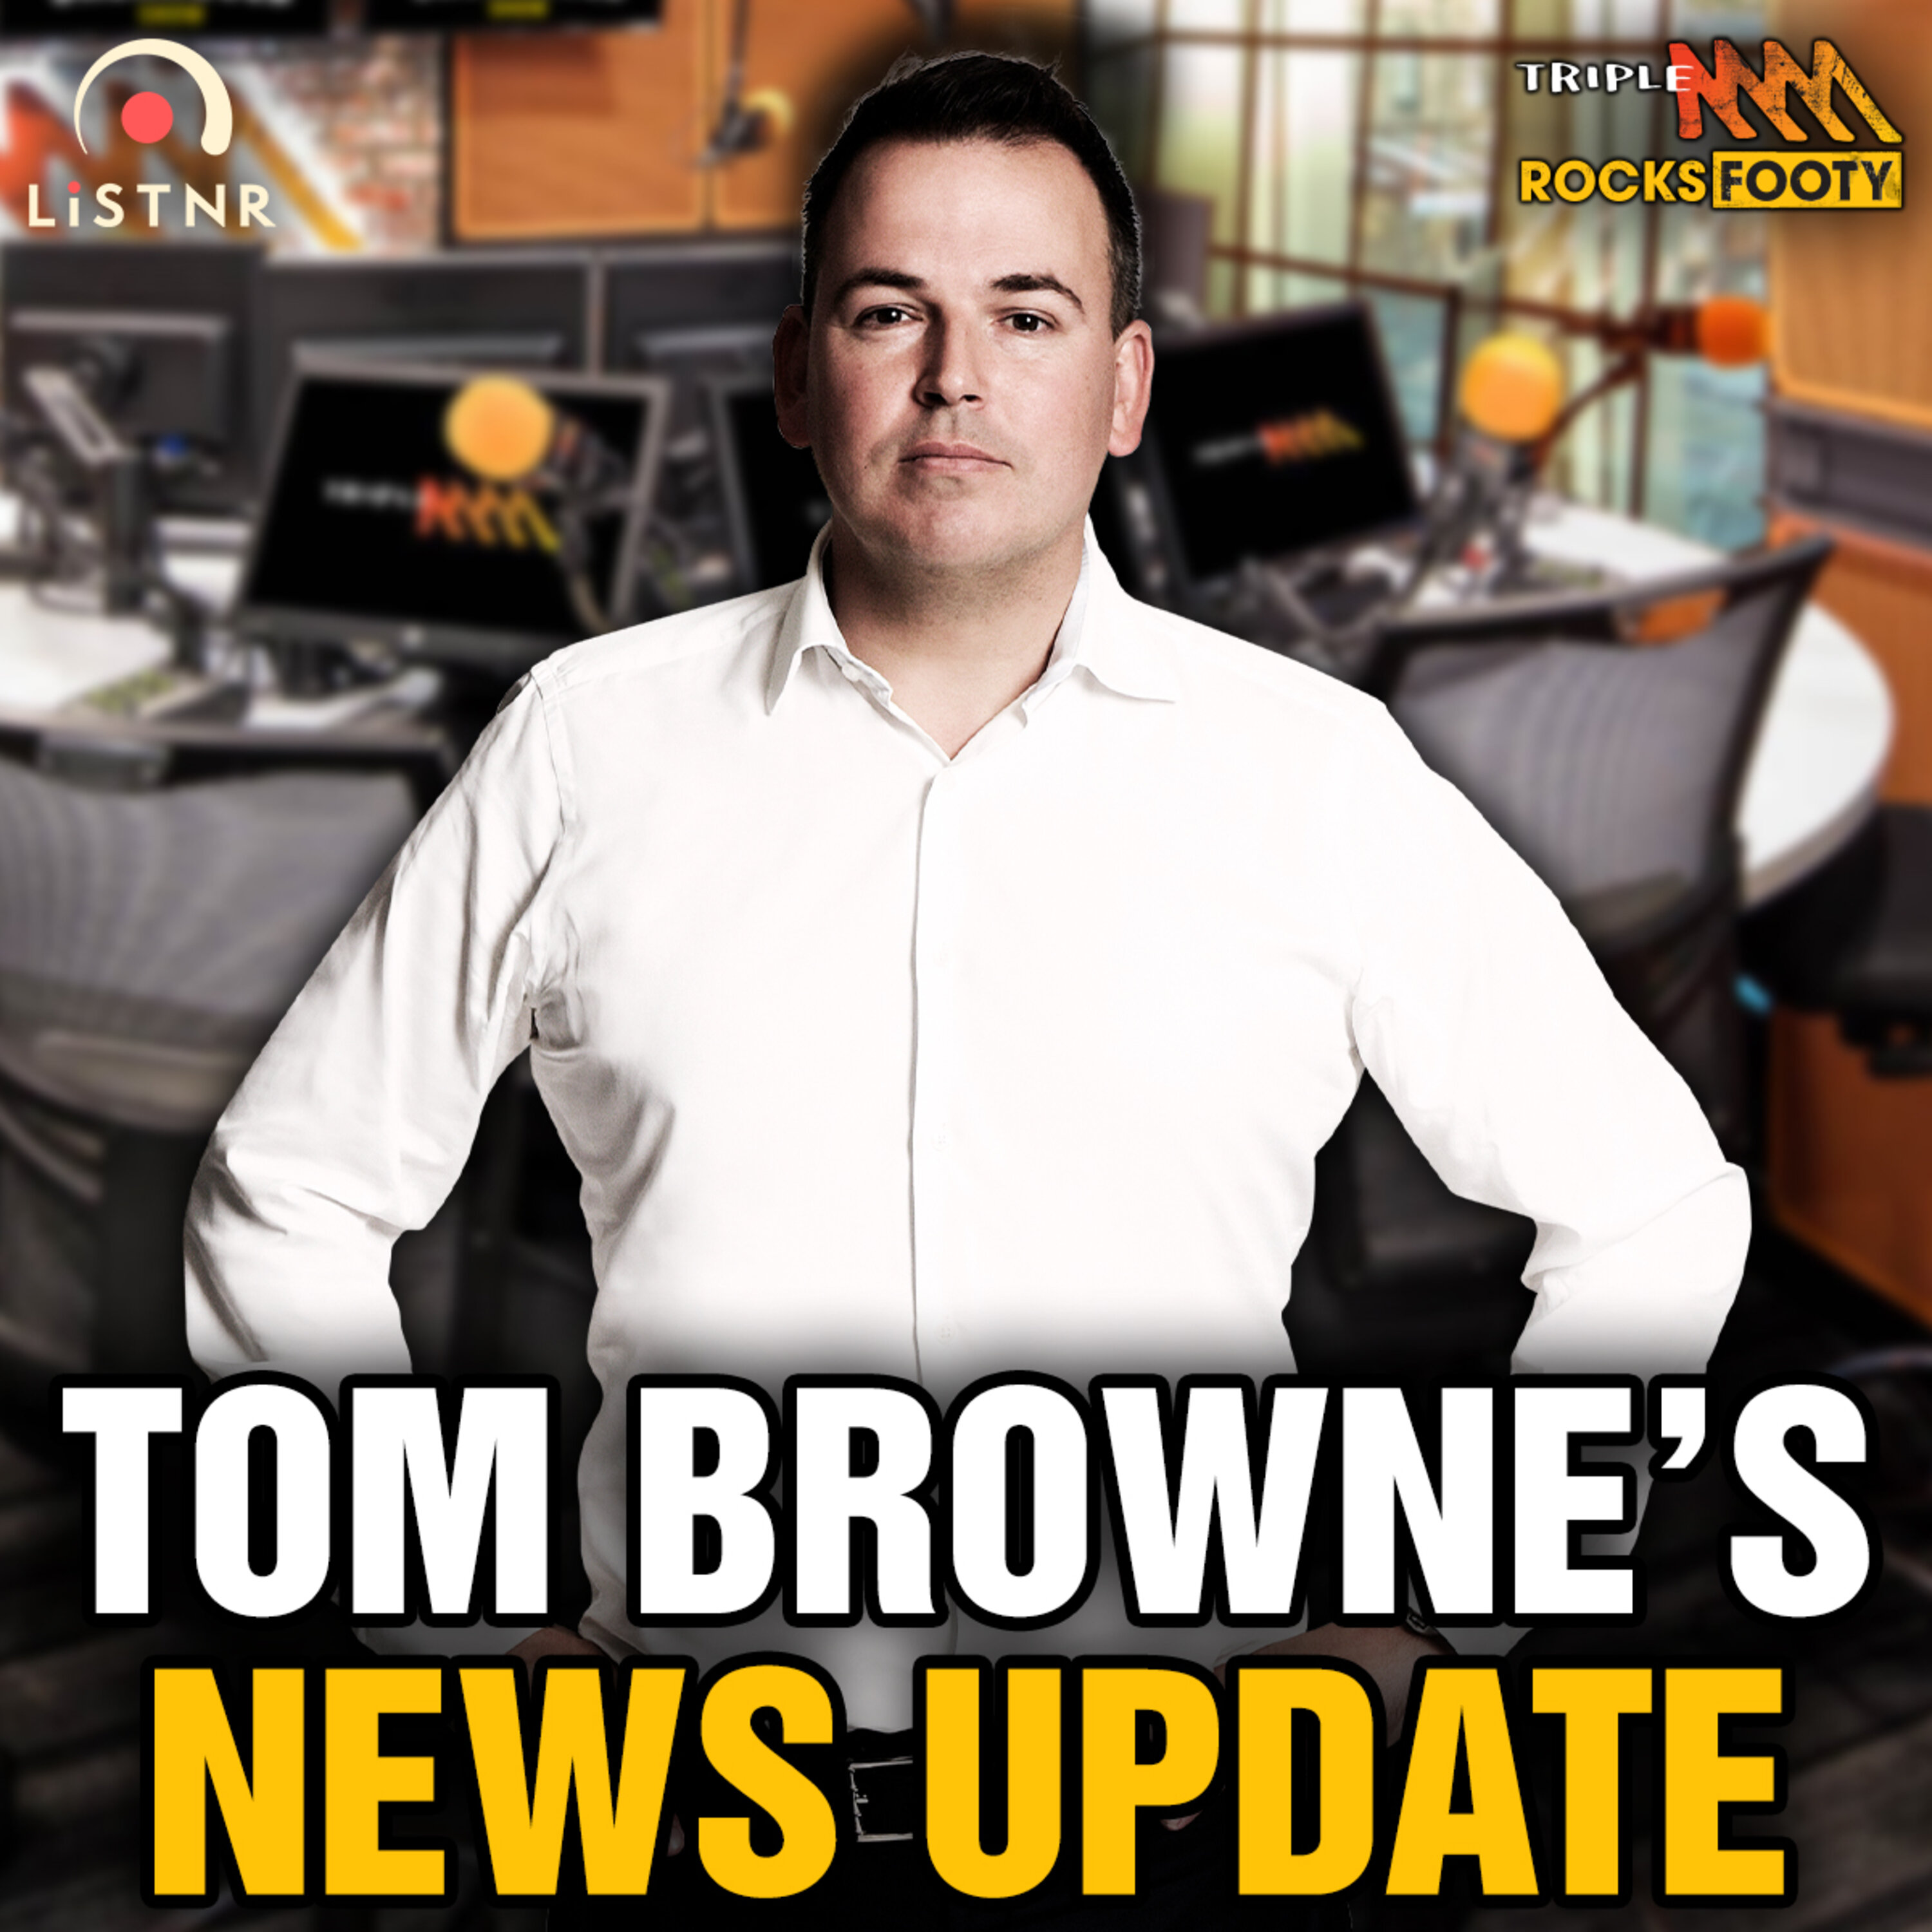 Tom Browne's News | The most infamous camera angle in footy to get fixed, next fixture bloc winners and losers, Hawthorn investigation process has become a "farce"